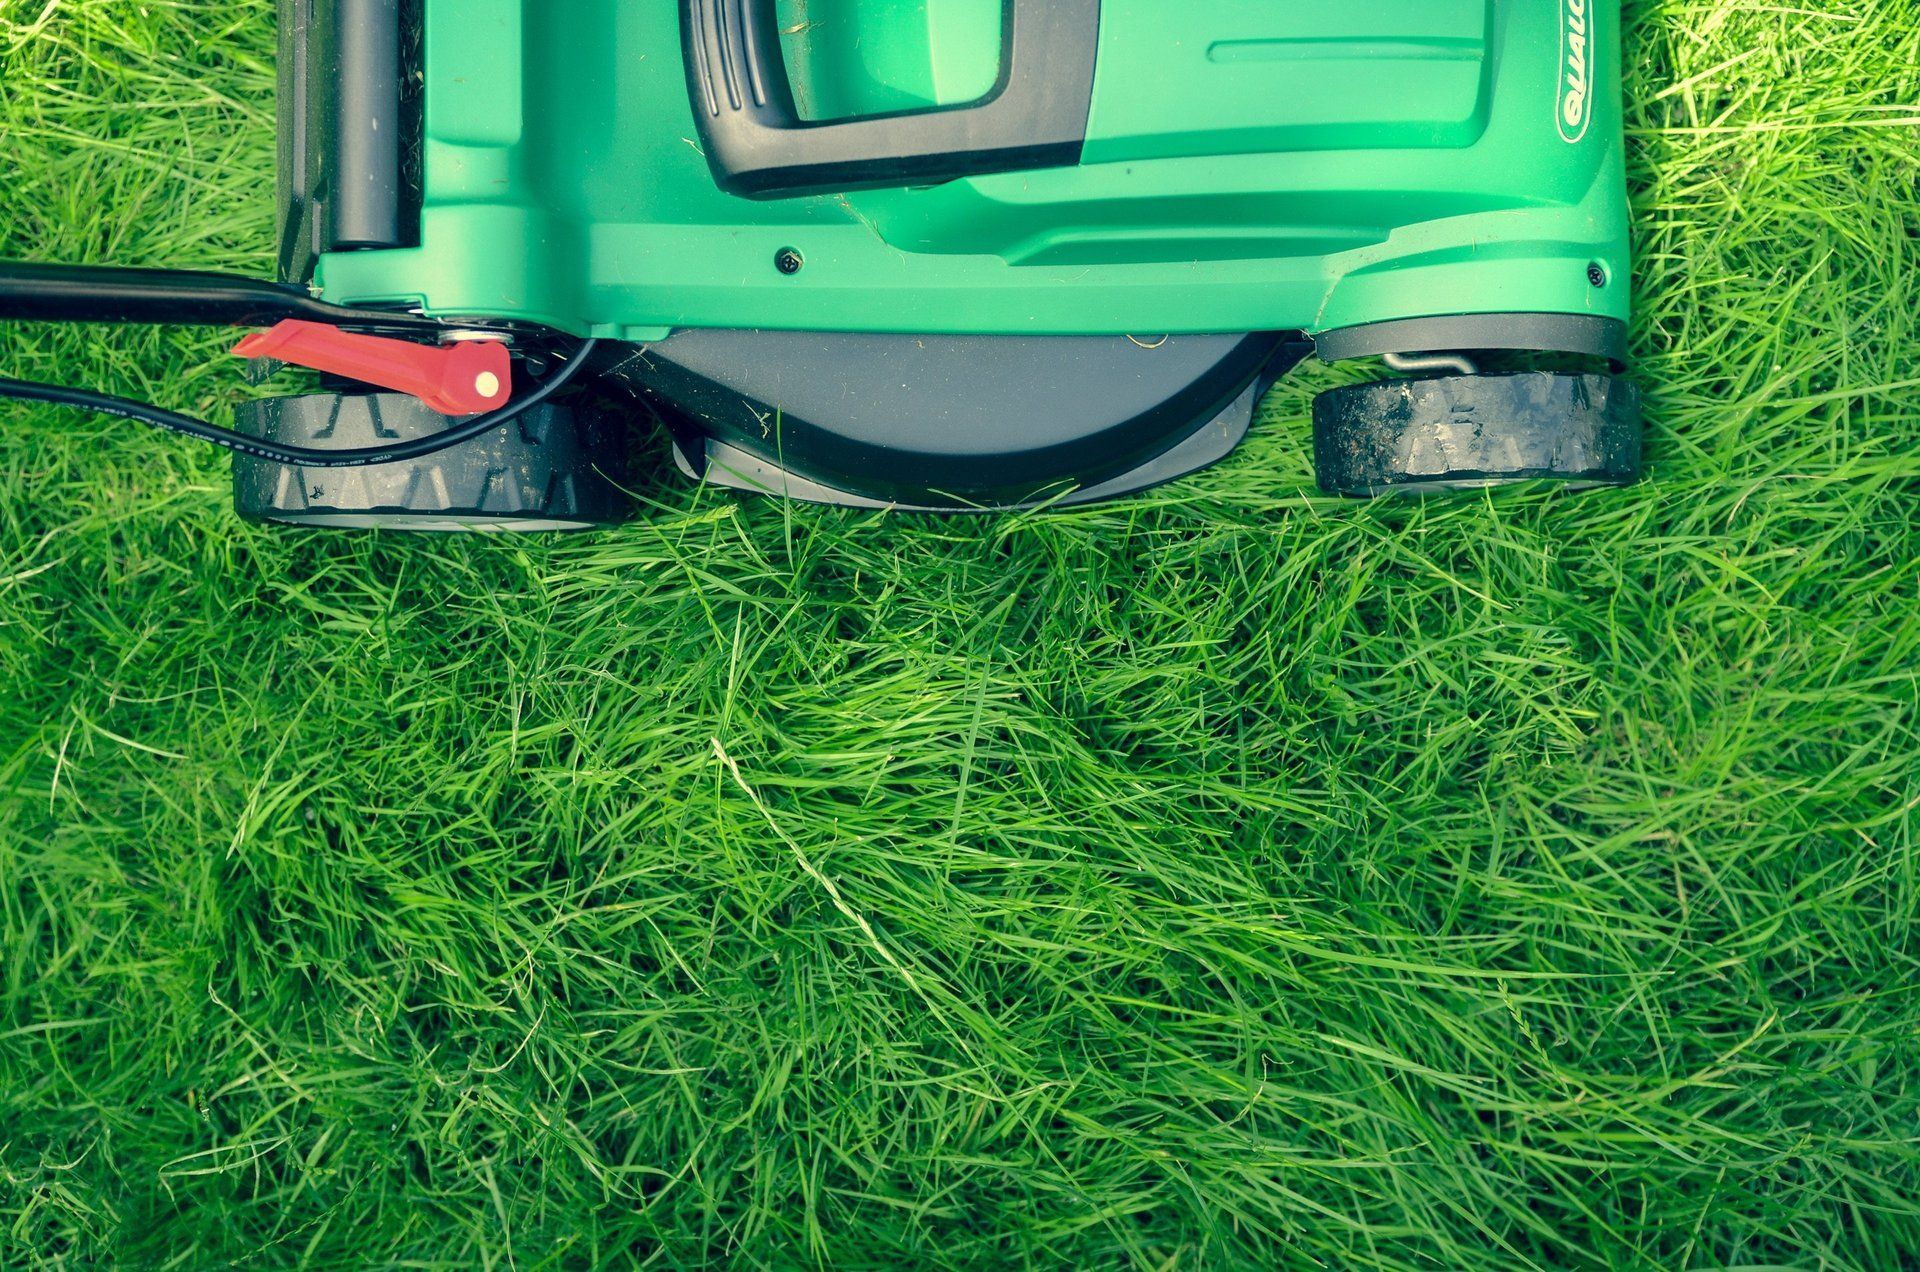 Does frequent lawn mowing make thicker grass